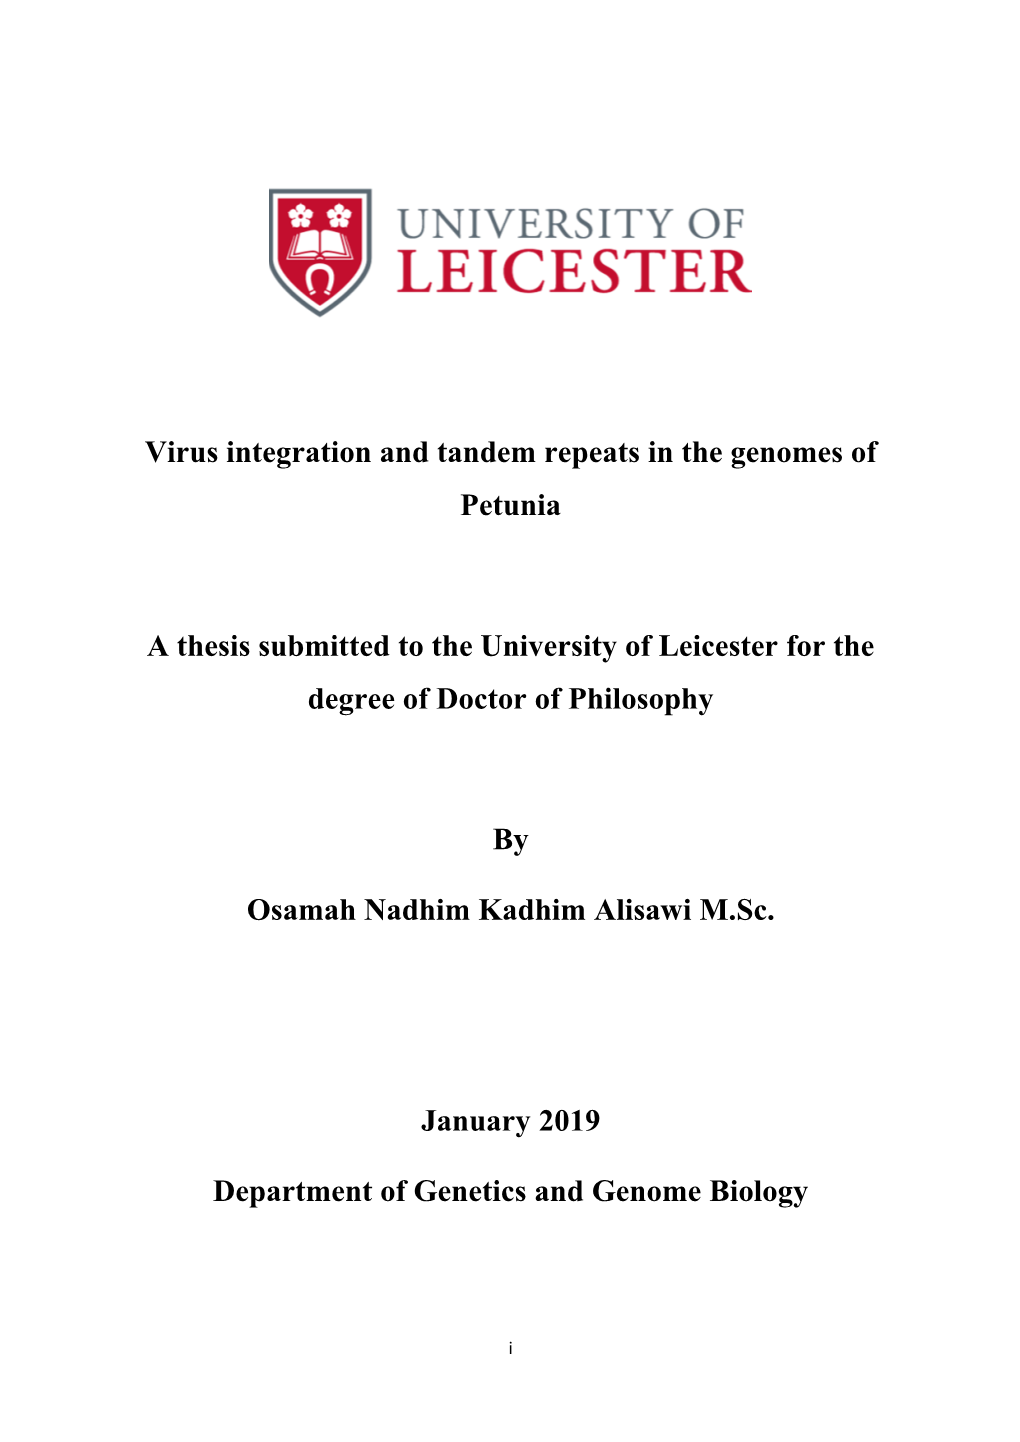 Virus Integration and Tandem Repeats in the Genomes of Petunia a Thesis